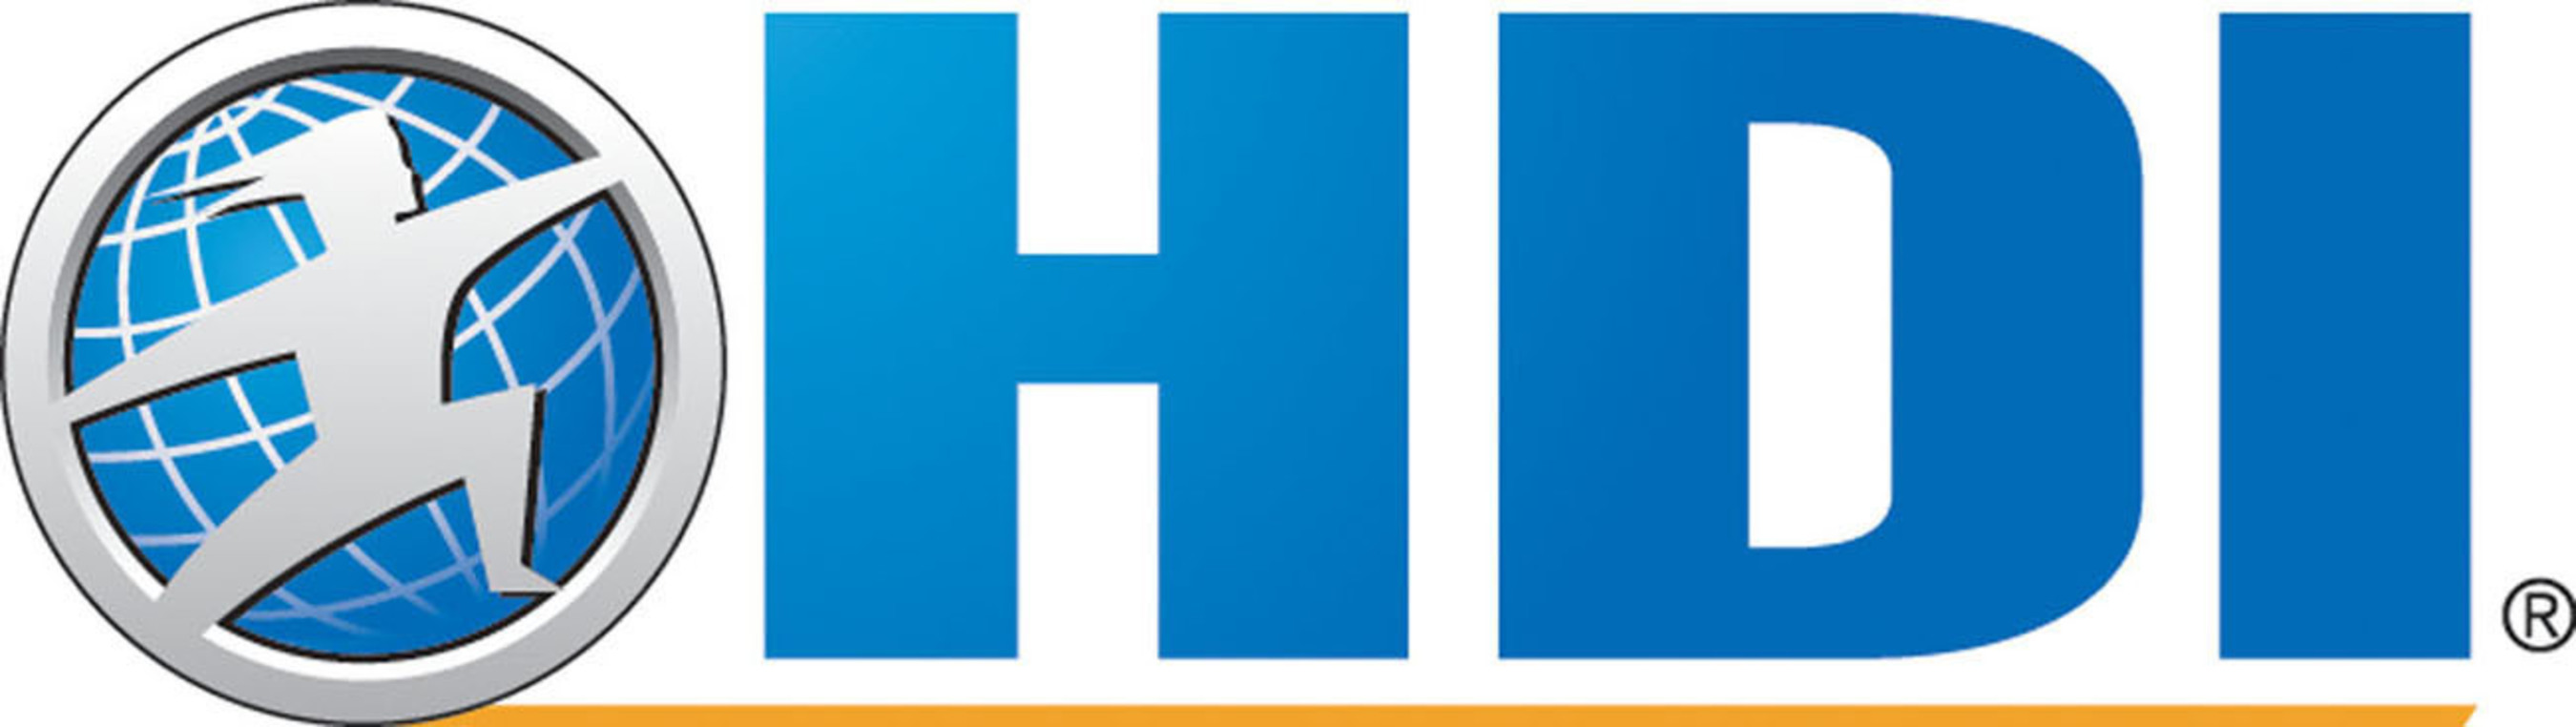 HDI will take place March 24-27, 2015 at the Mandalay Bay Convention Center in Las Vegas.